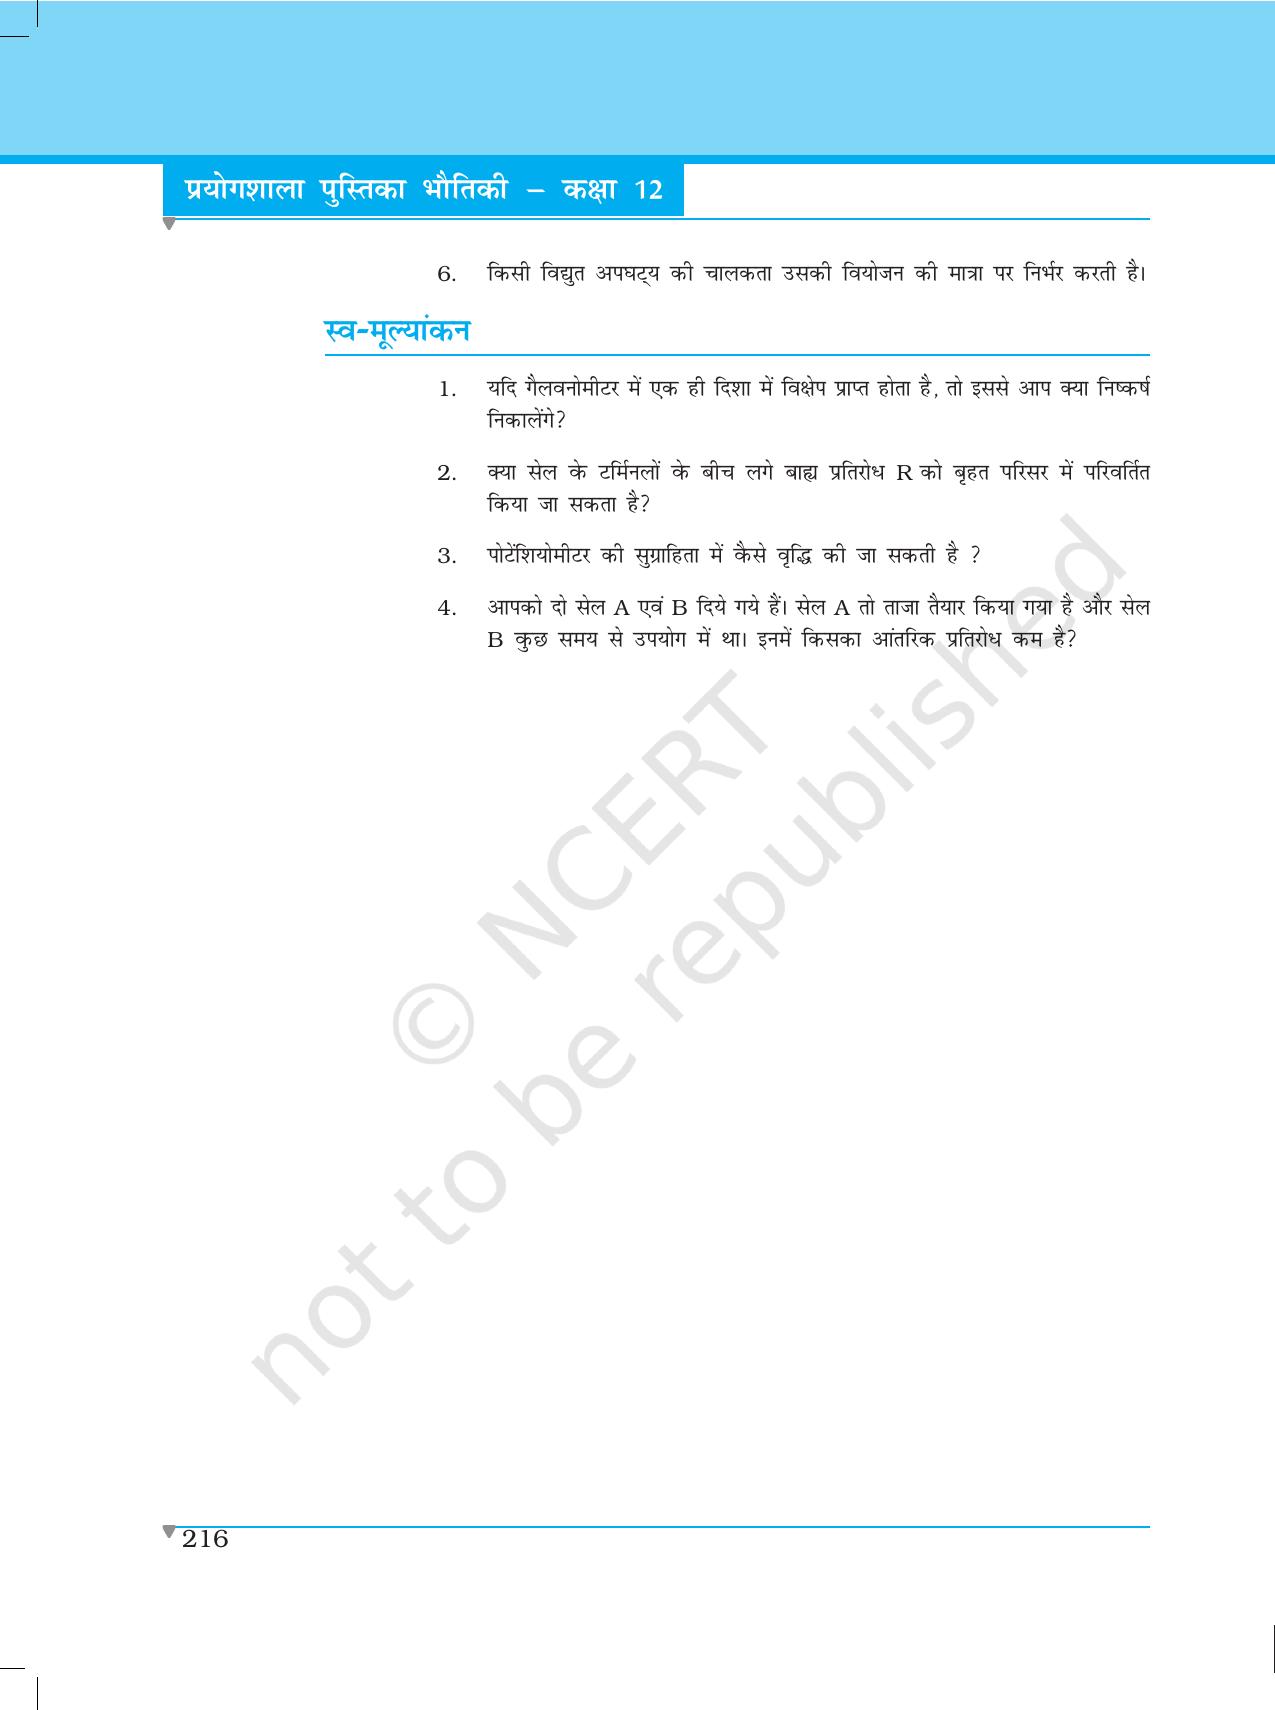 NCERT Laboratory Manuals for Class XII भौतिकी - परियोजना (1 - 7) - Page 10